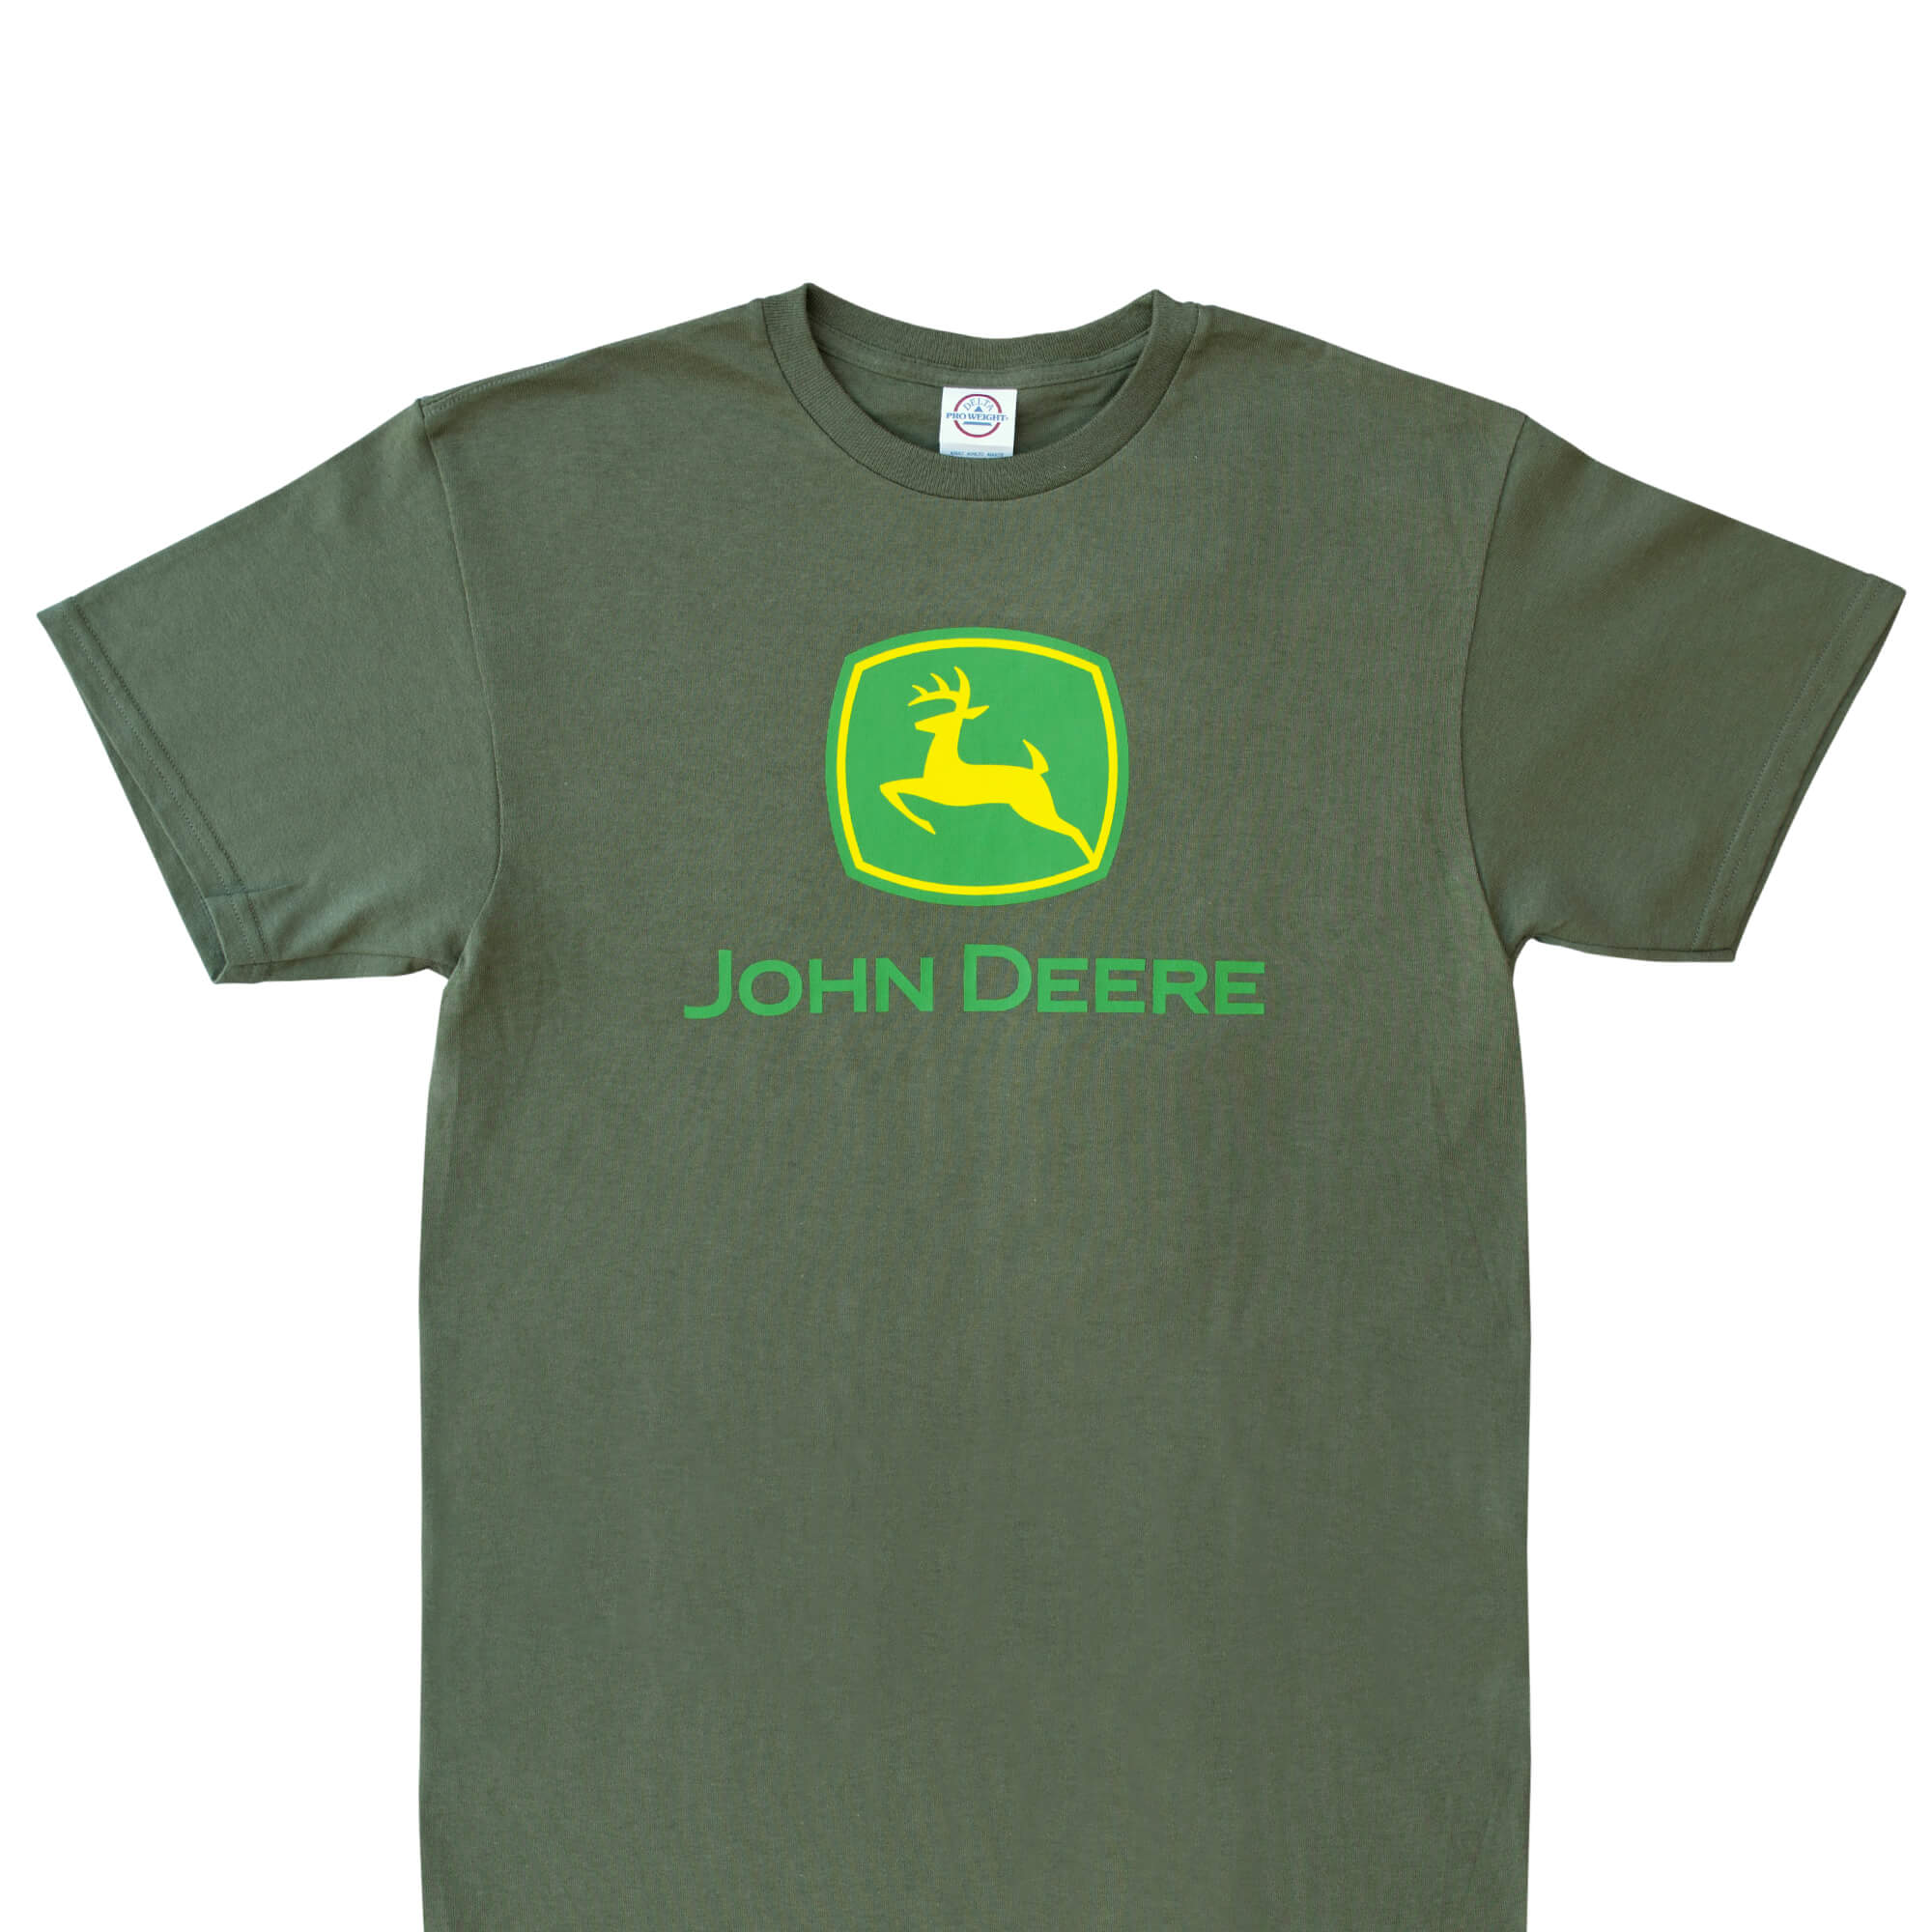 Deere Men's Textured Cotton Short sleeve Solid T-shirt Work Shirt (Large) Tops & Shirts at Lowes.com